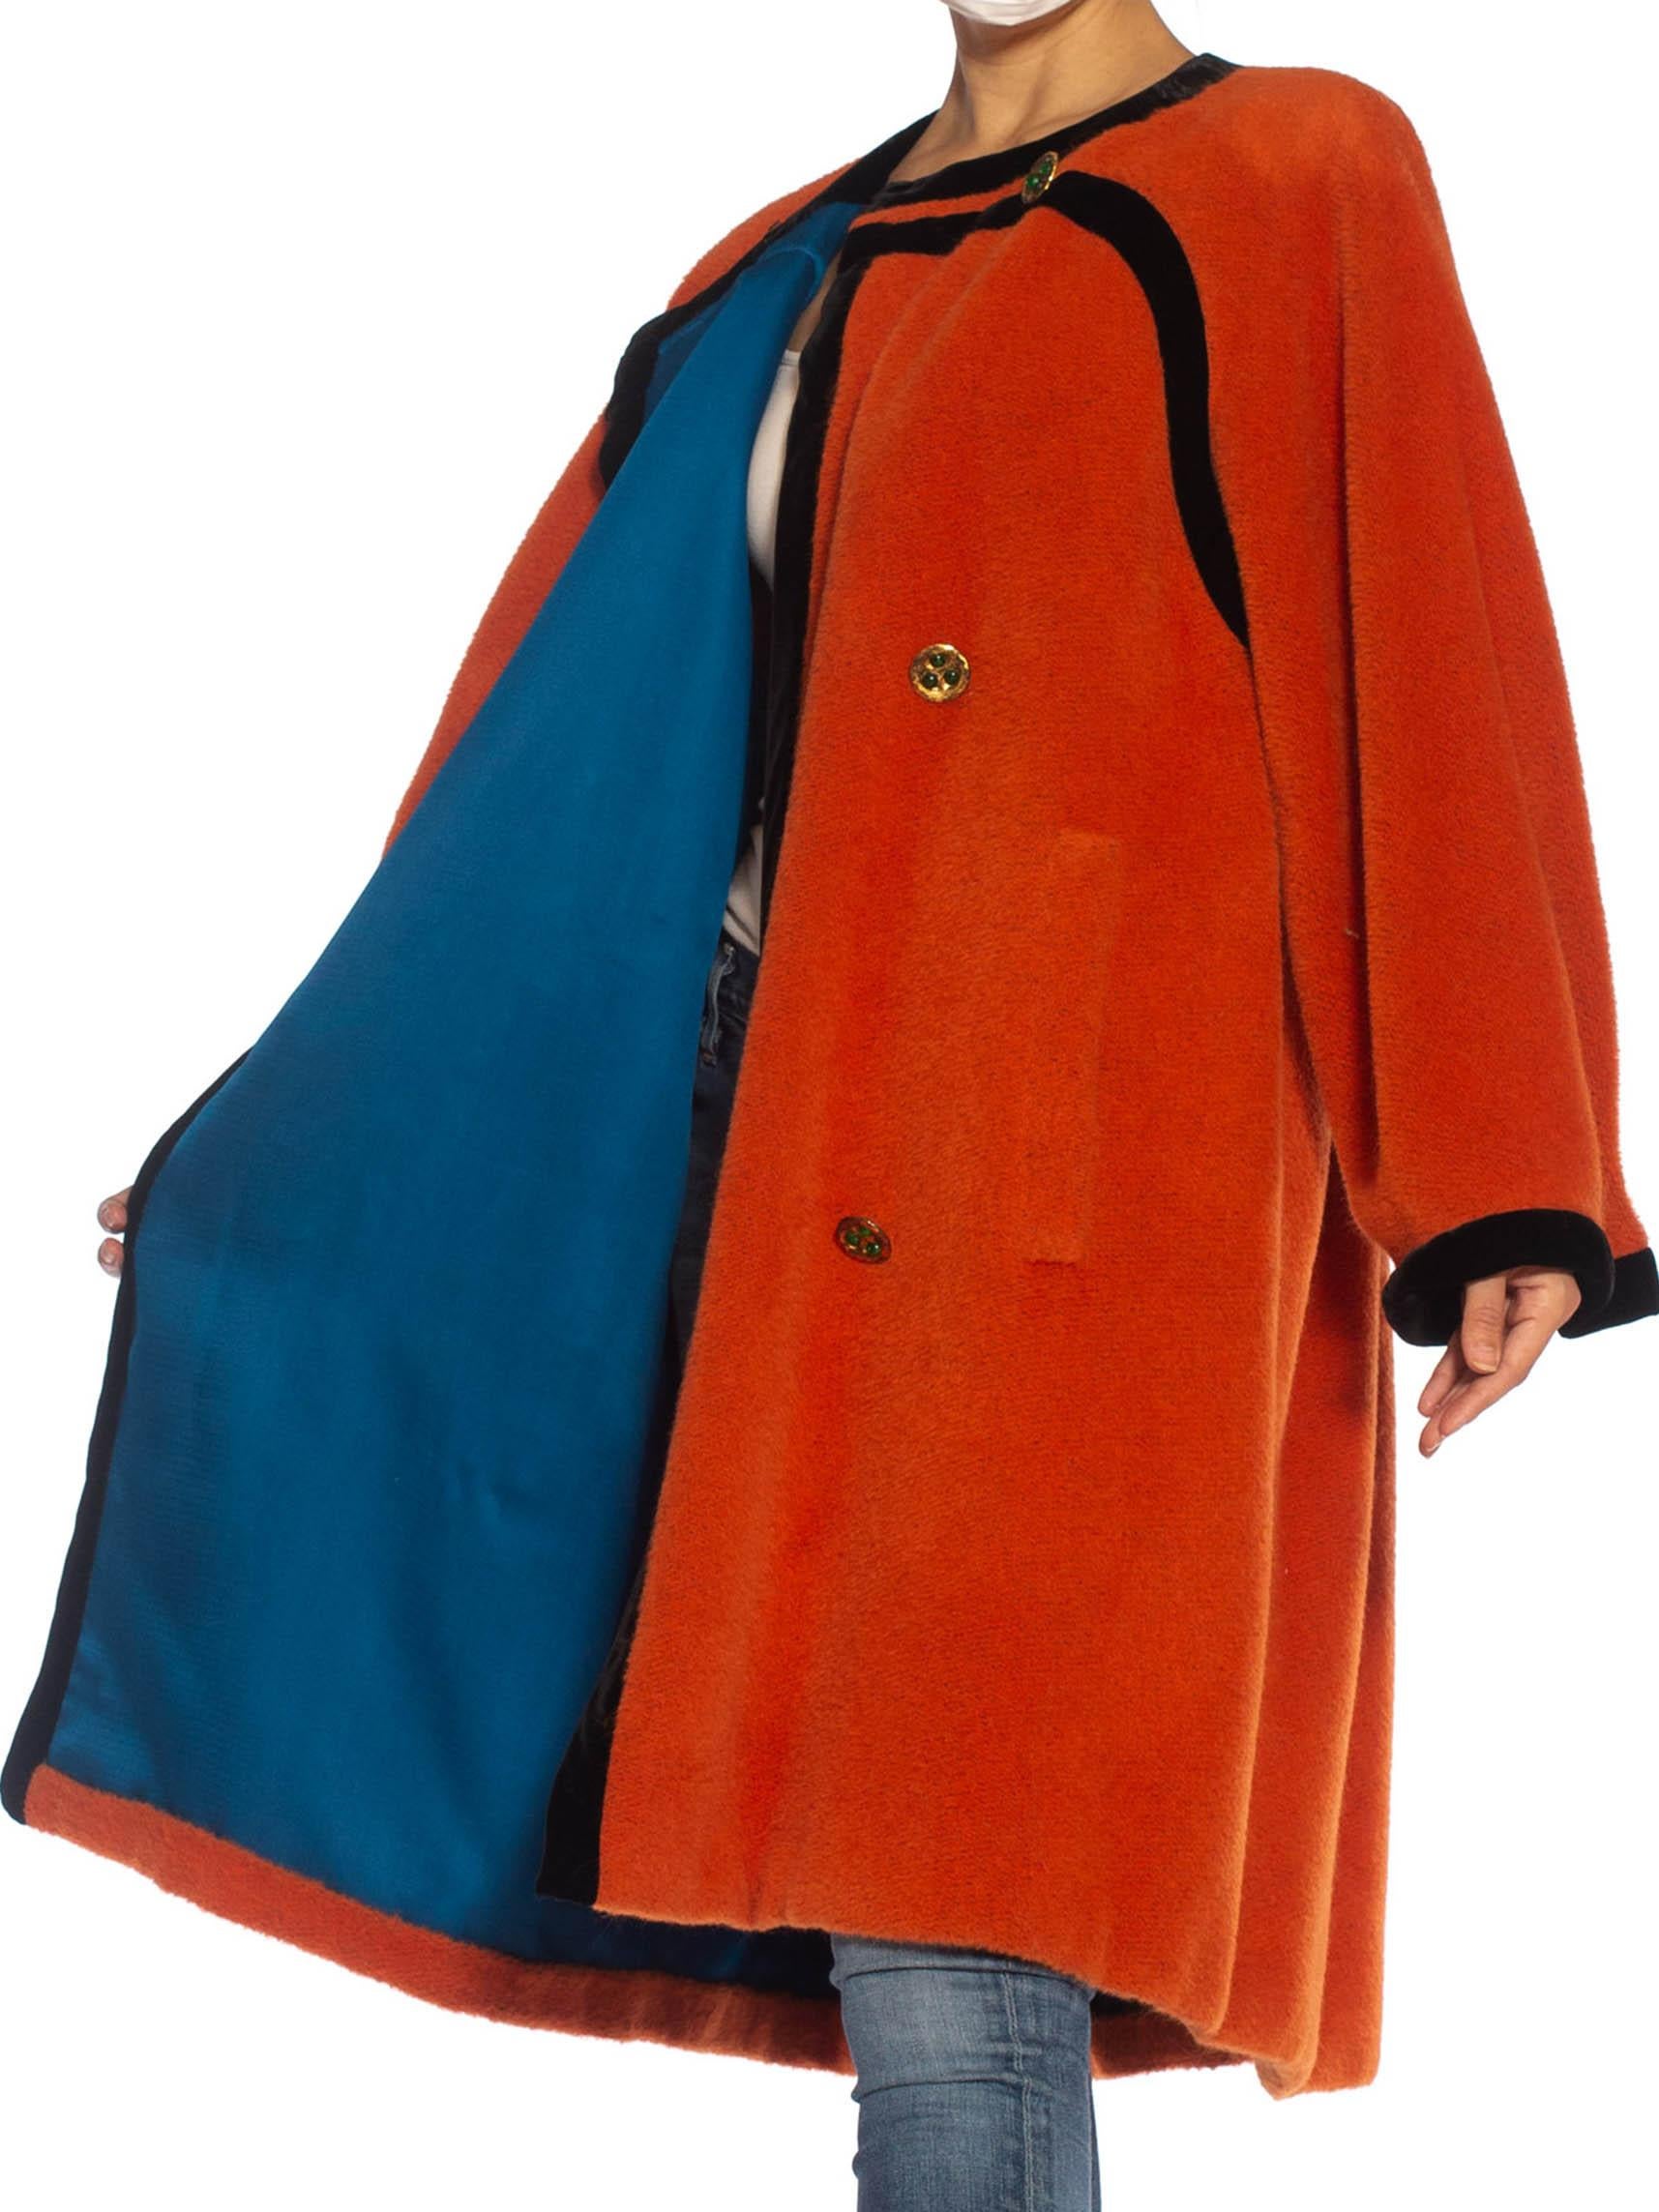 Women's 1980S EMANUEL UNGARO Orange Haute Couture Mohair Wool Coat Lined In Electric Bl For Sale